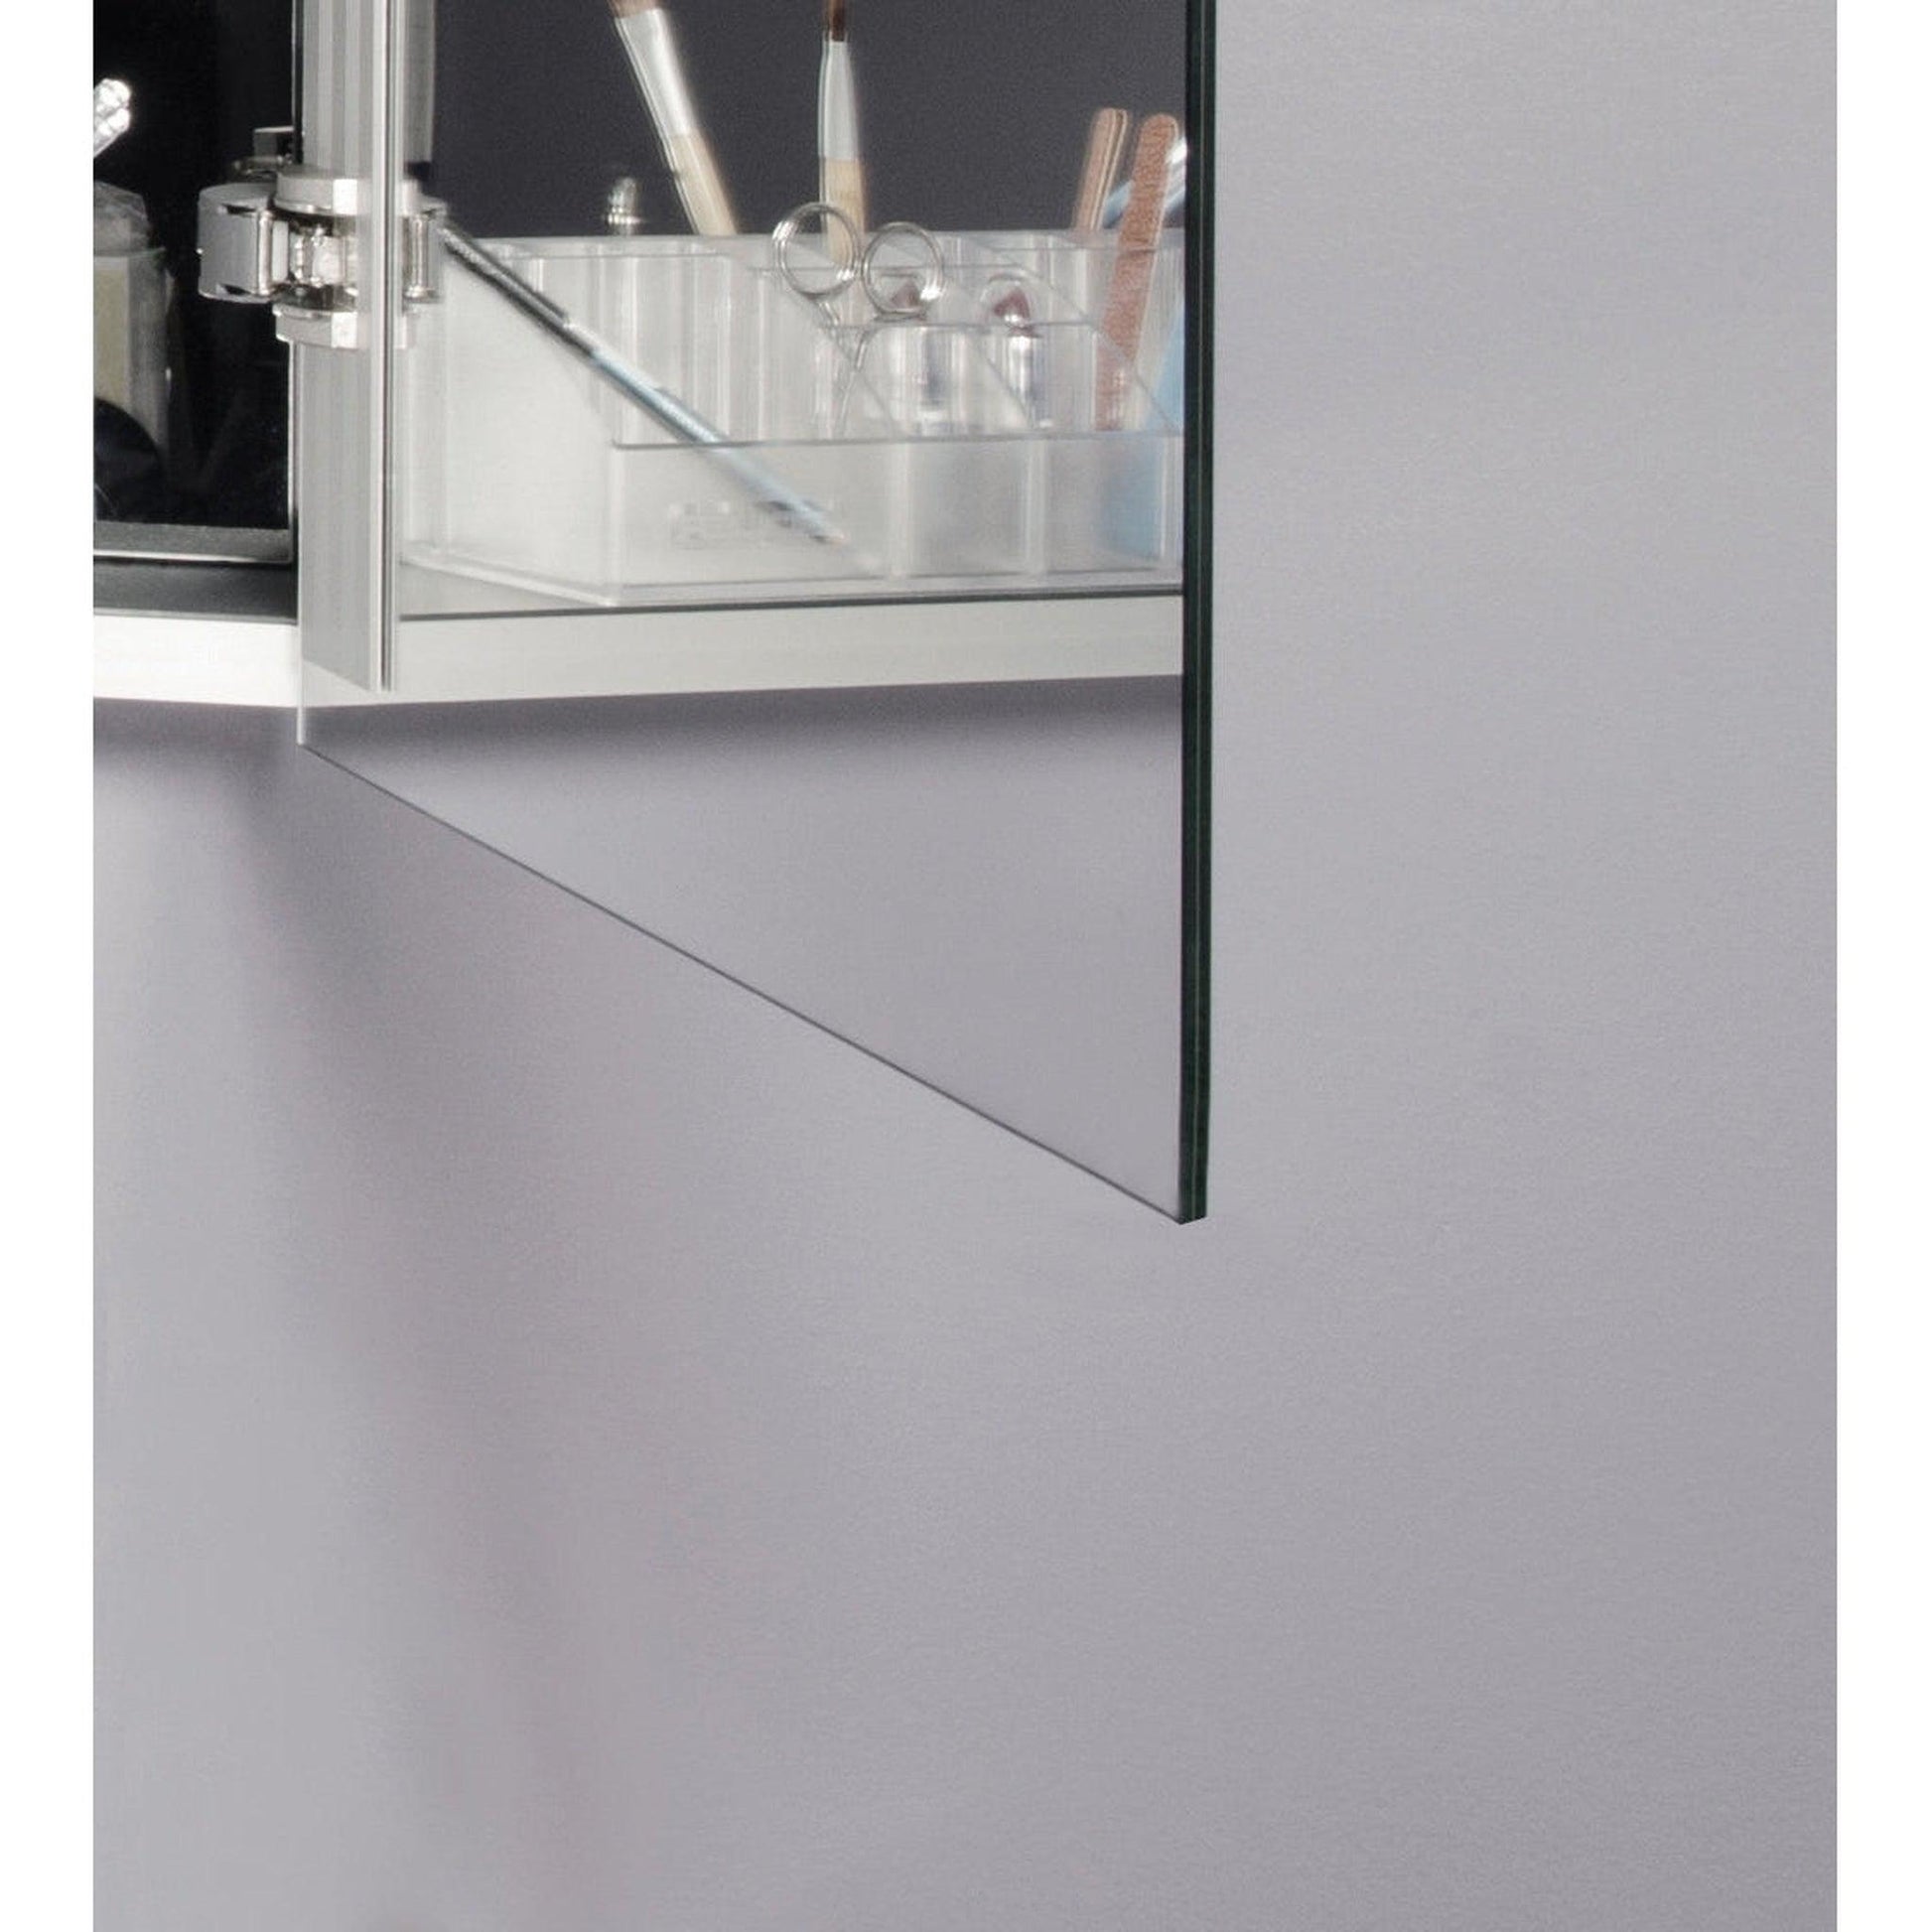 Sidler Xamo 36" x 30" 3000K Double Mirror Door Medicine Cabinet With Built-in GFCI outlet and Night Light Function